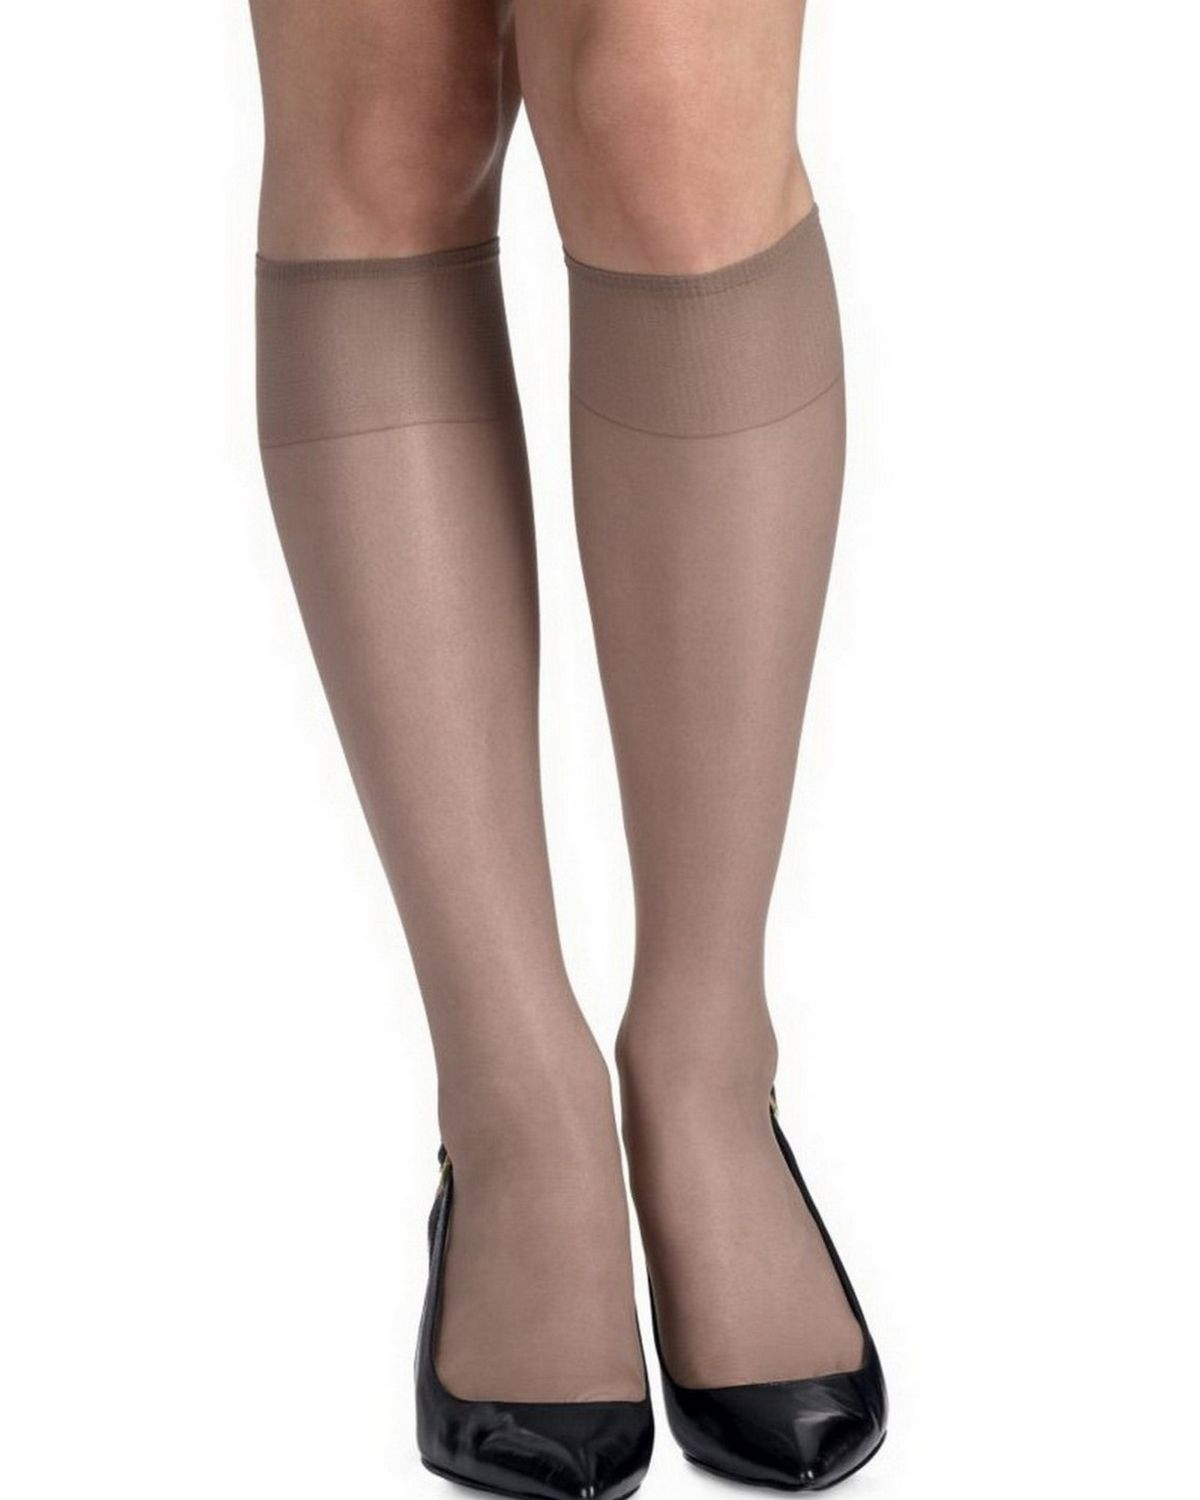 Hanes 775 Women's Silk Reflections Silky Sheer Knee Highs Reinforced Toe 2-Pack - Soft Taupe - One Size #silk